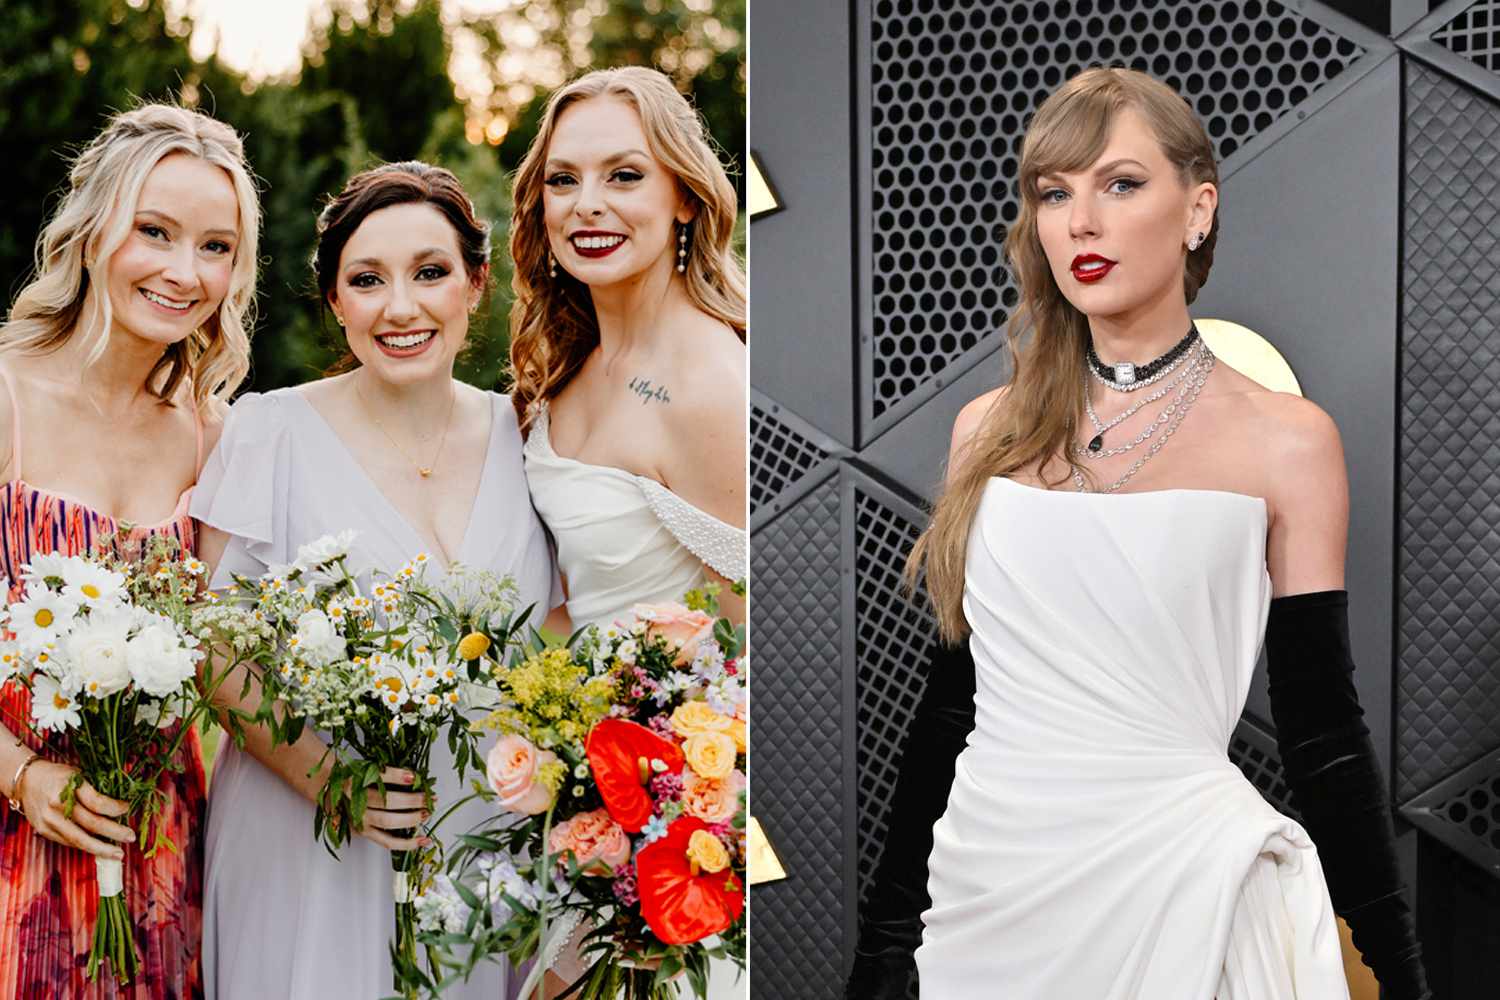 It's a Love Story! Bride hosts a Taylor Swift-themed WEDDING complete with Lover décor, special drinks, and LOTS of the star's music (and even earns a shoutout from the singer)